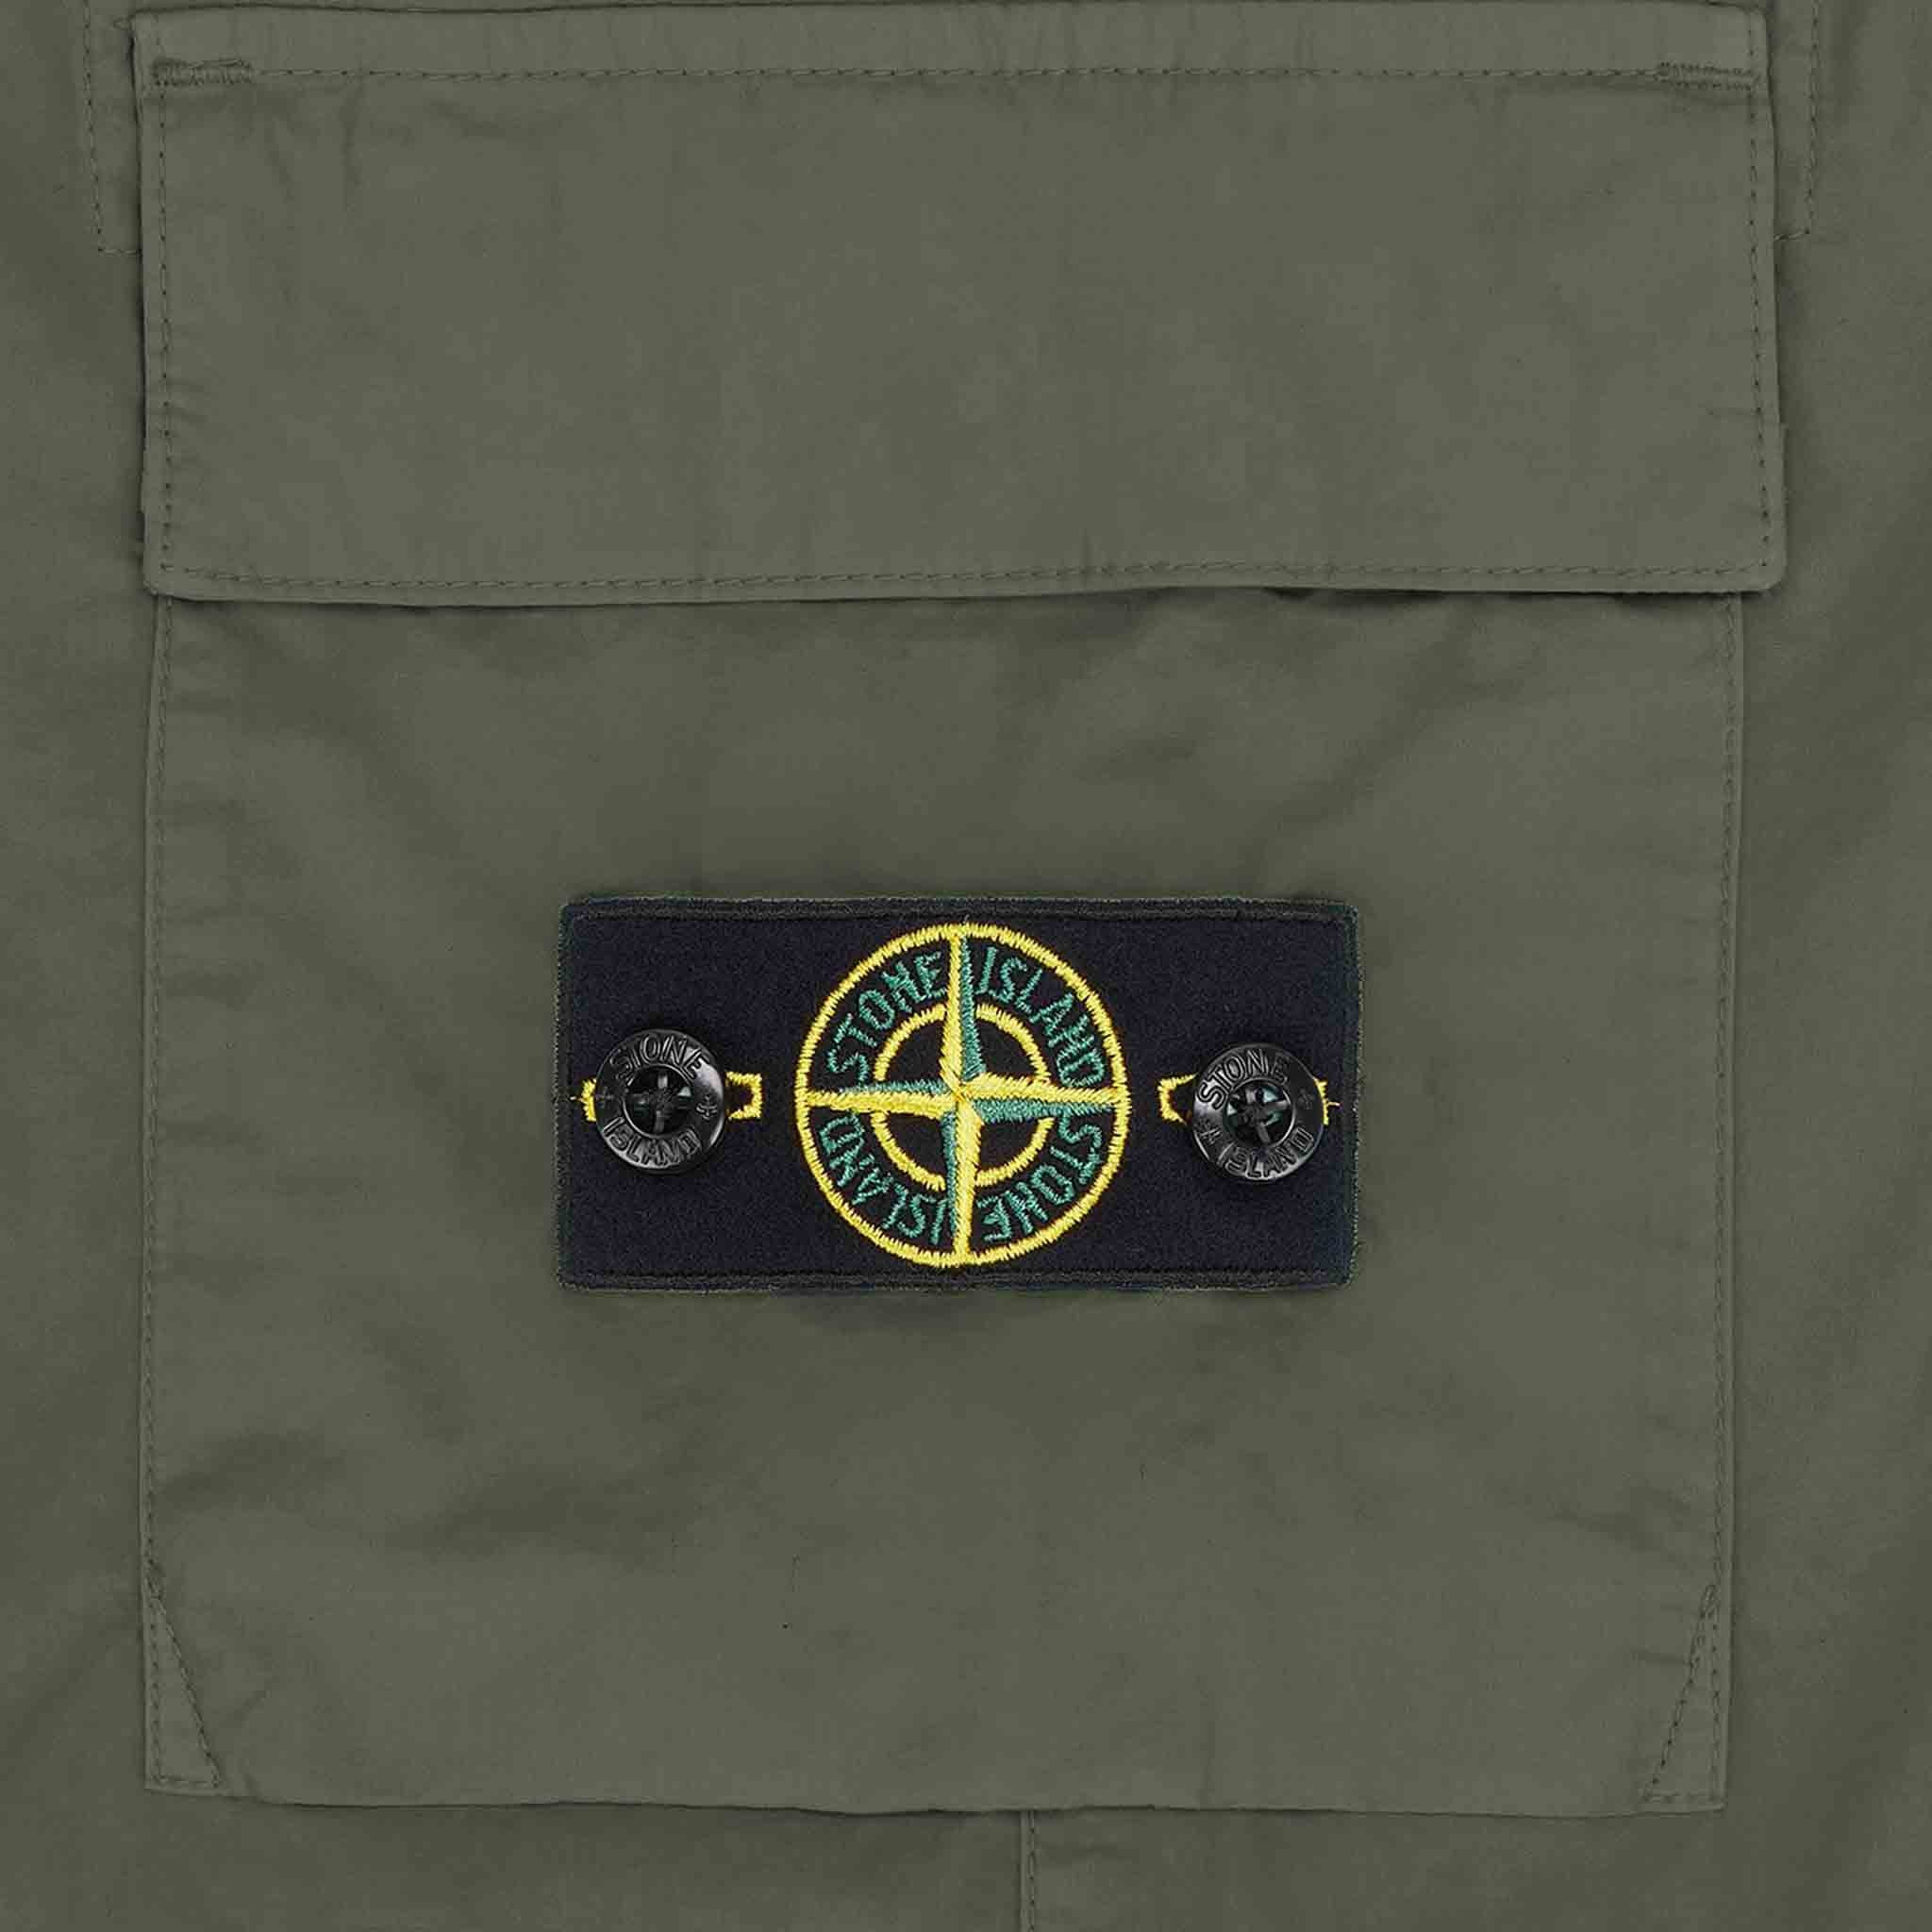 Stone Island Junior Cargo Trousers Cuffed Bottoms in Olive Green